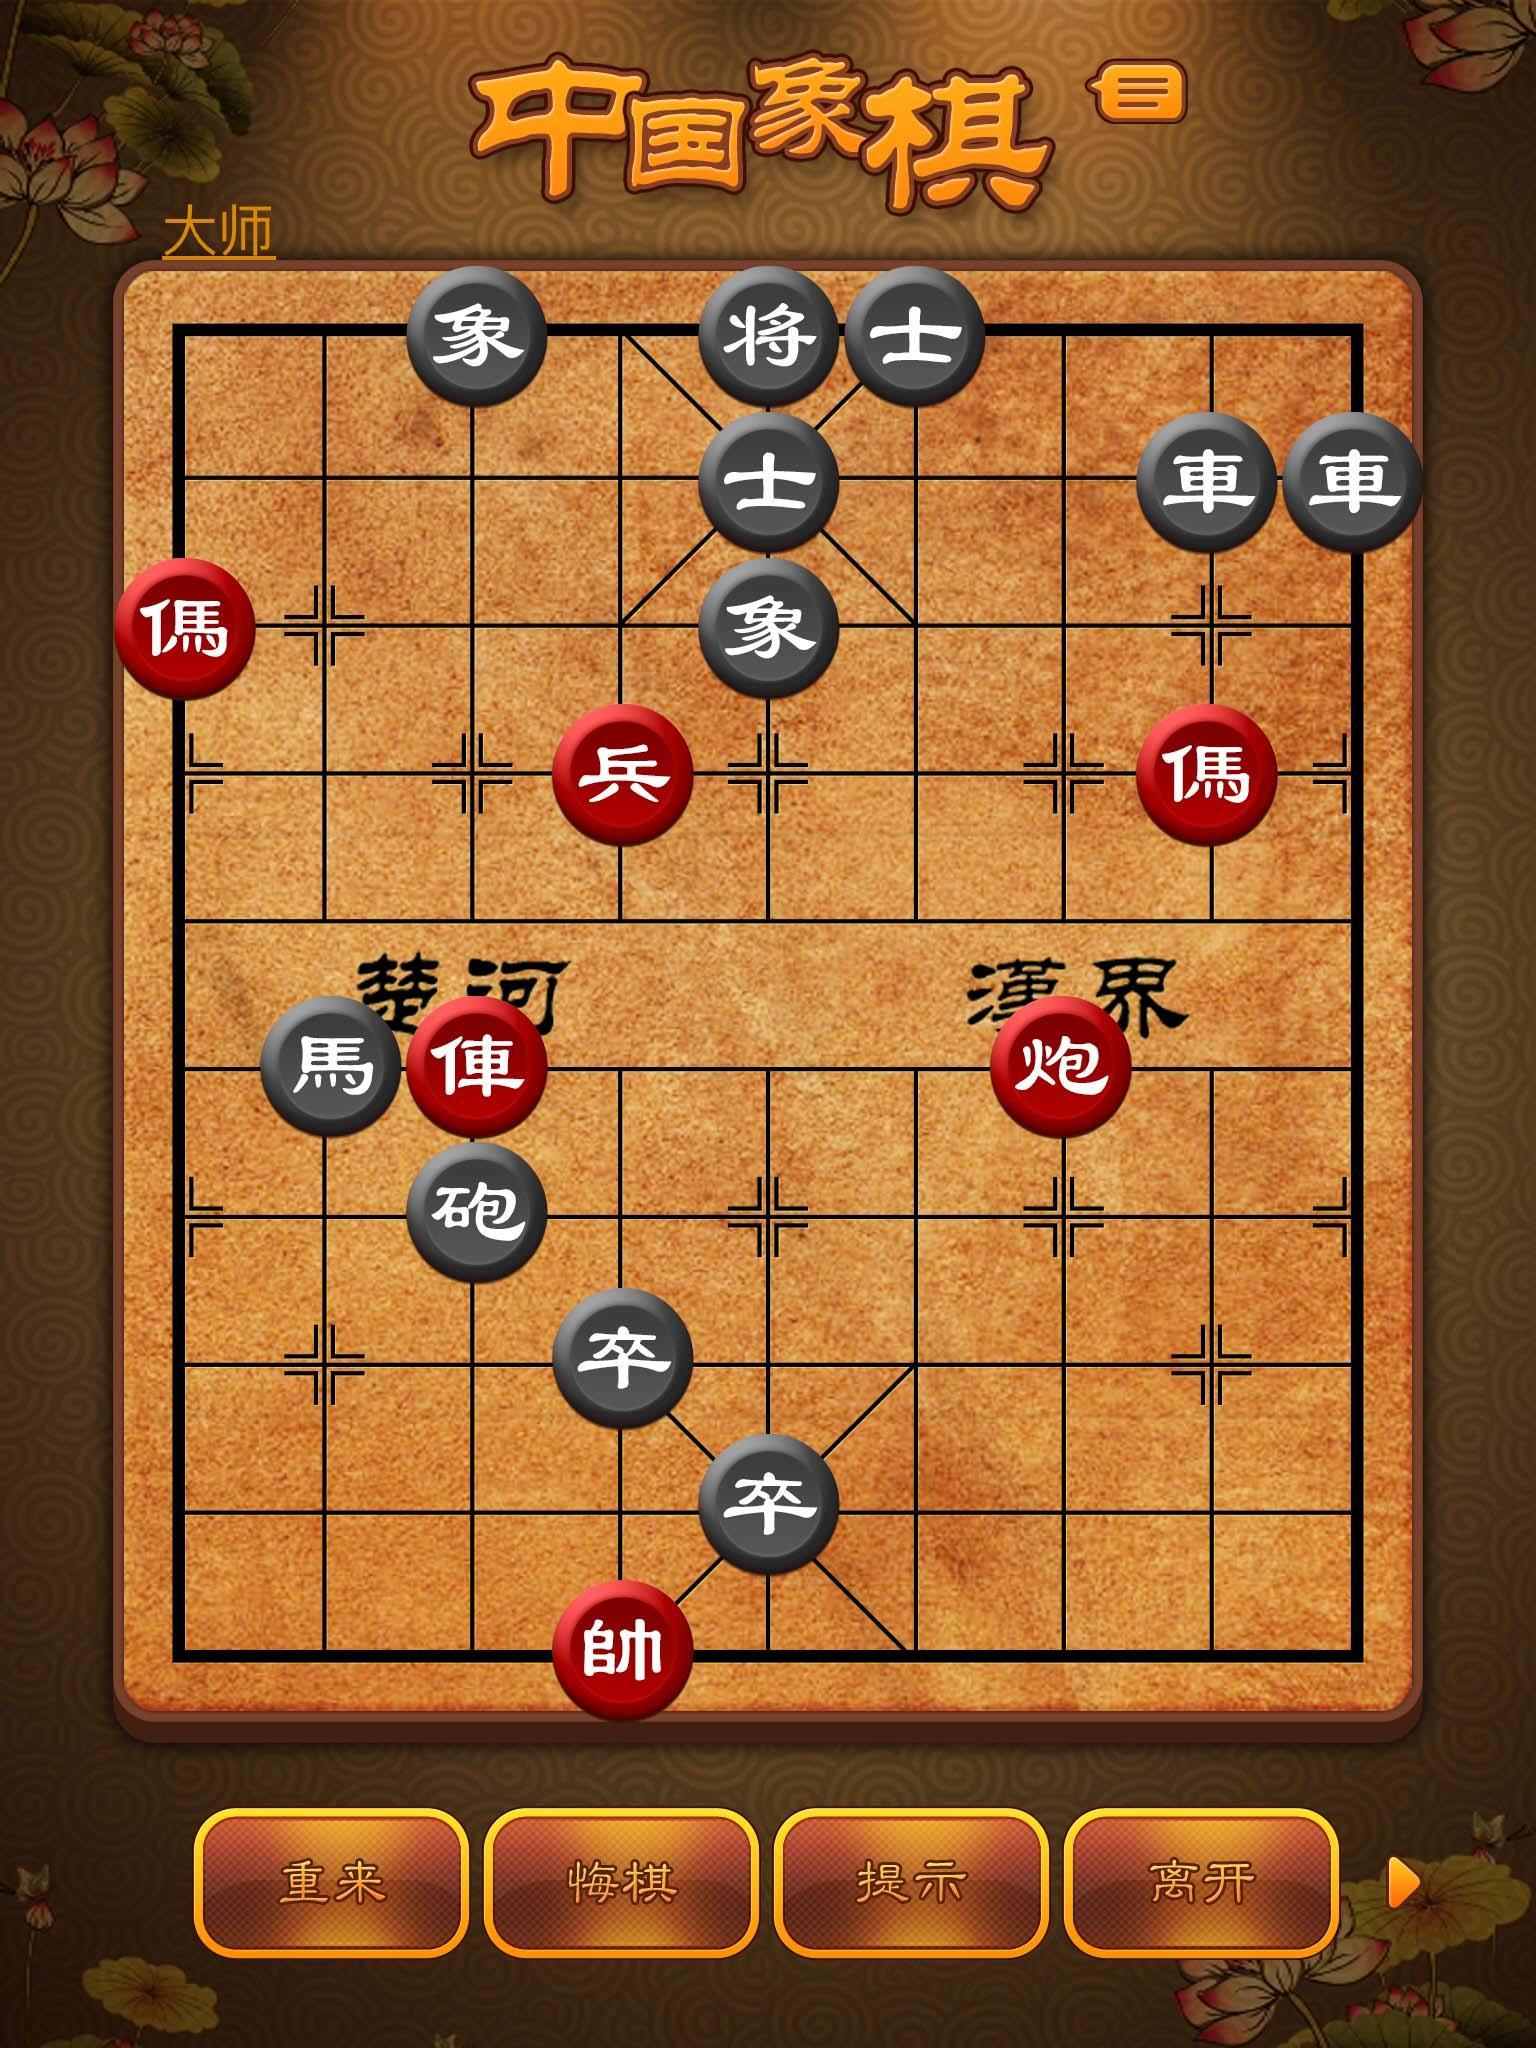 chinese chess game online free download